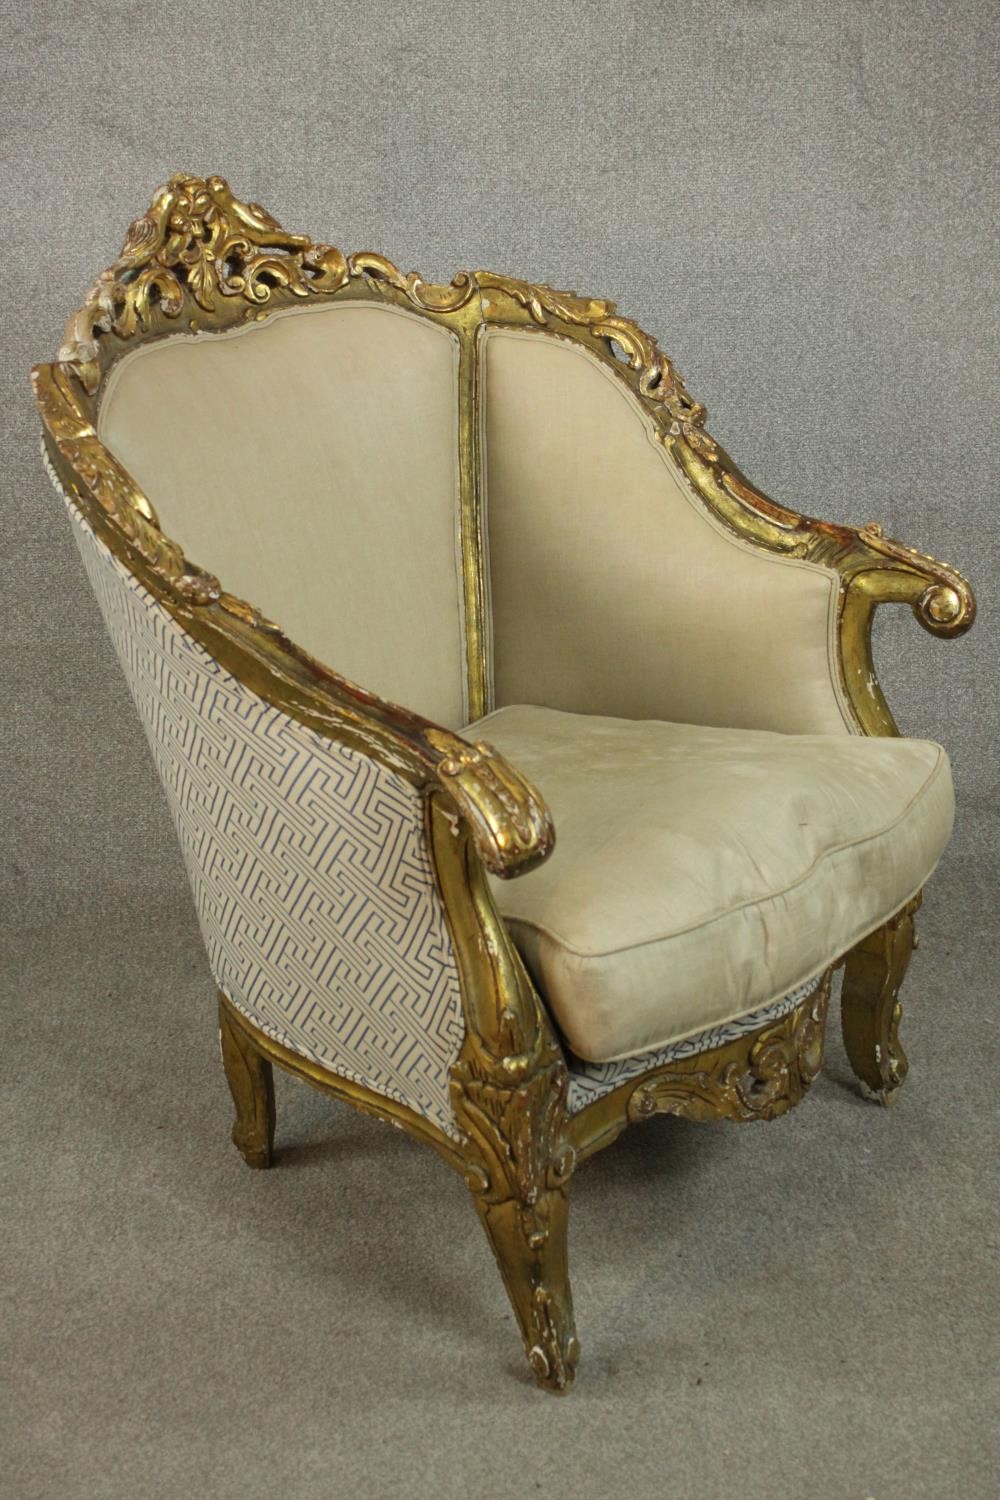 A pair of Louis XV style carved giltwood armchairs, 20th century, upholstered in beige fabric, - Image 3 of 10